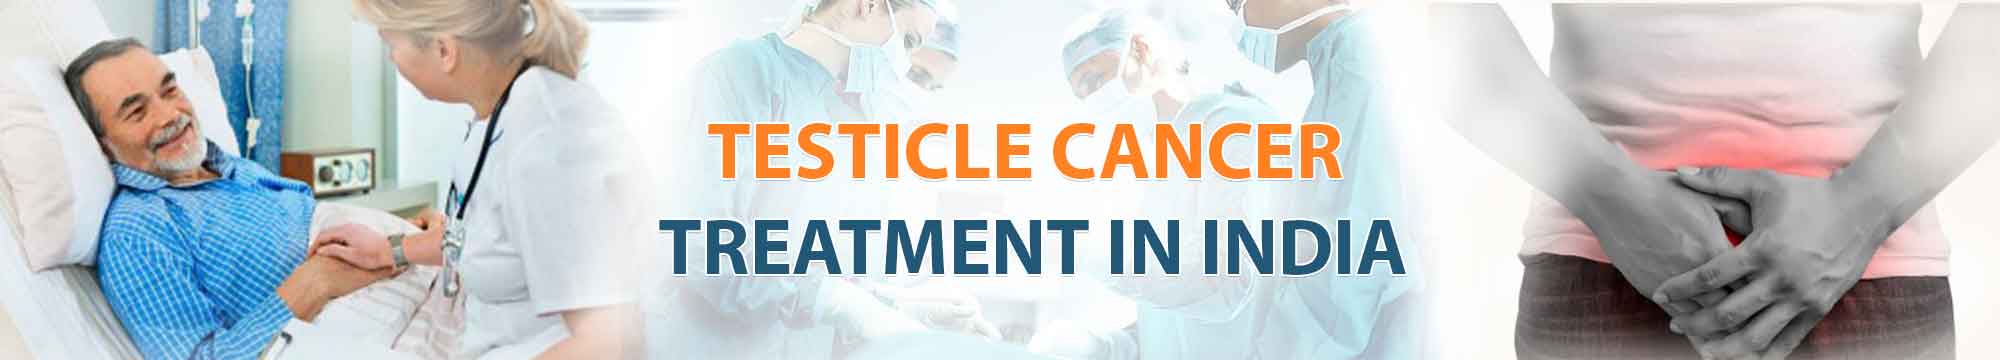 Testicular Cancer Treatment In India